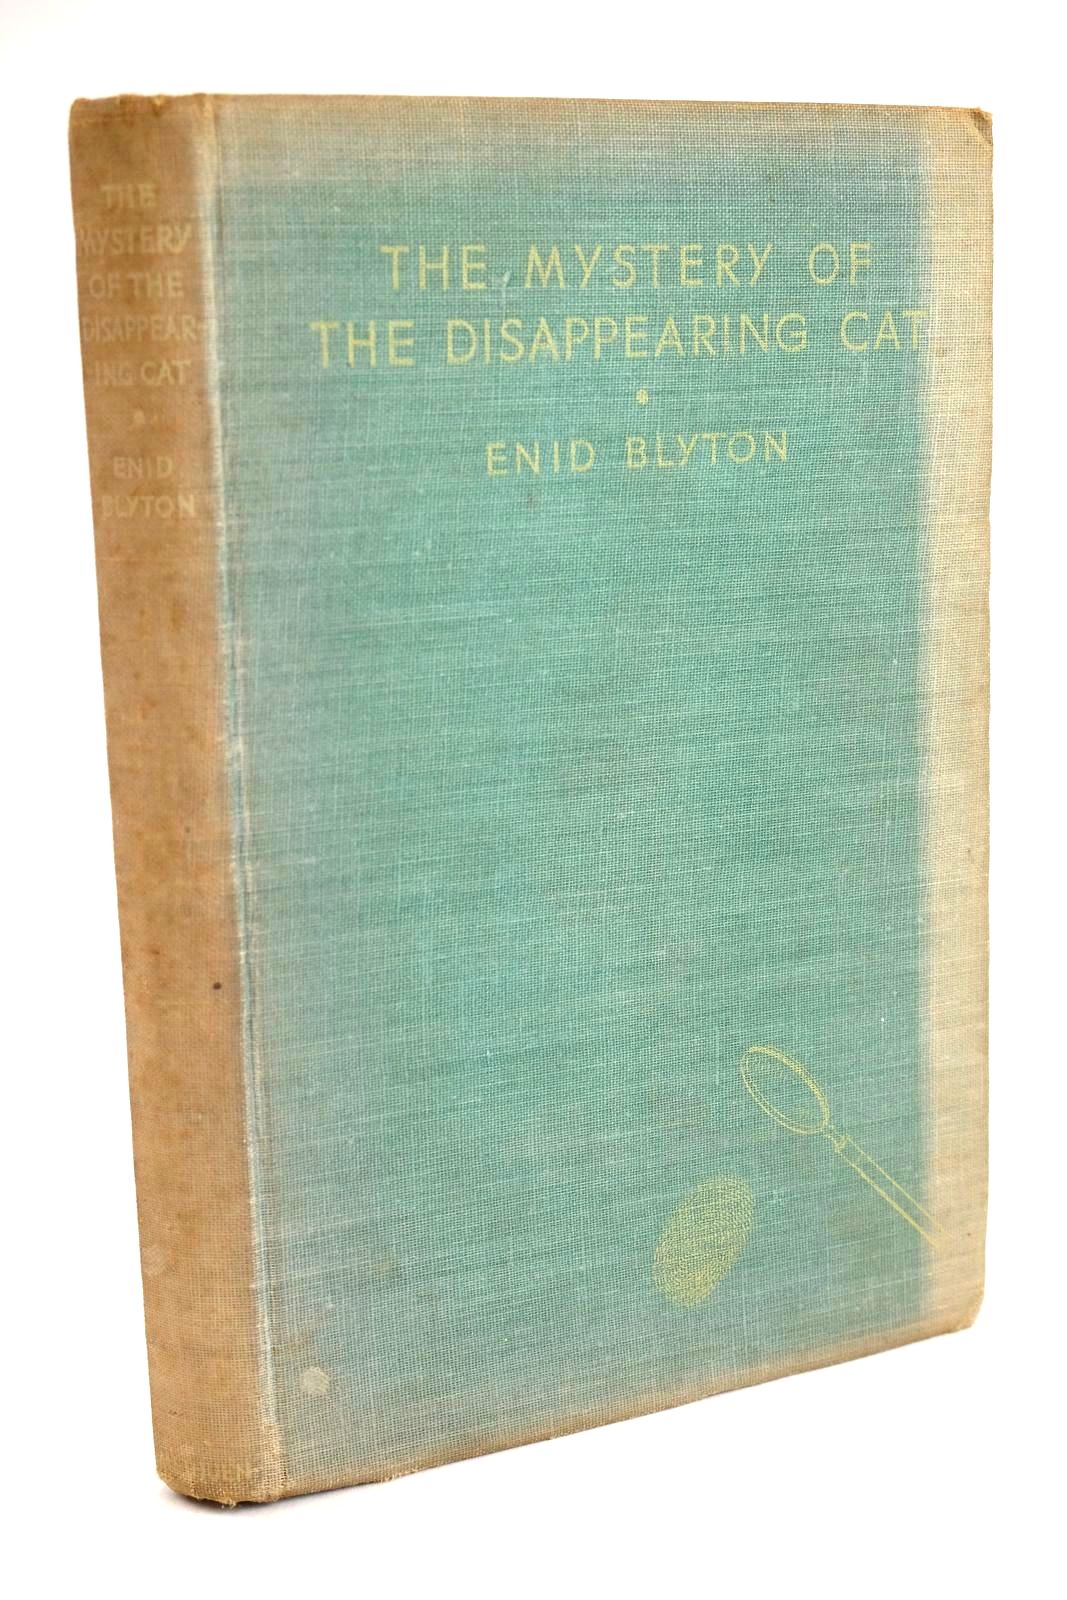 Photo of THE MYSTERY OF THE DISAPPEARING CAT written by Blyton, Enid illustrated by Abbey, J. published by Methuen &amp; Co. Ltd. (STOCK CODE: 1328054)  for sale by Stella & Rose's Books